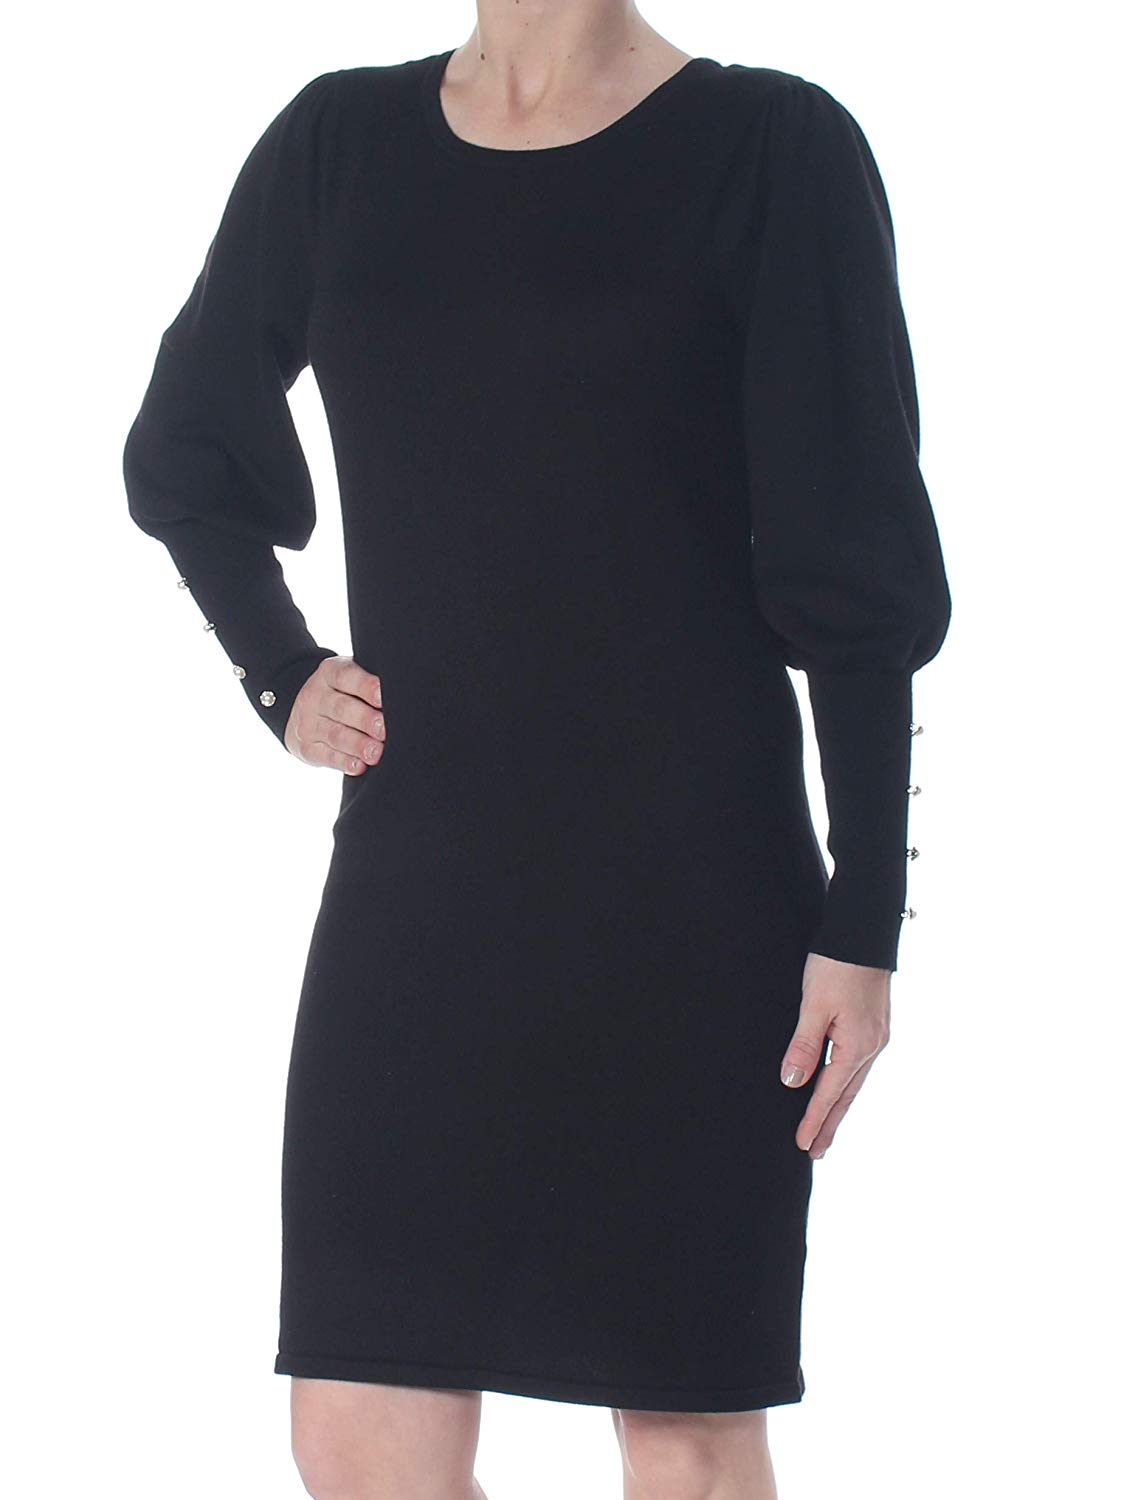 NY Collection Women's Petite Bishop-Sleeve Button-Cuff Dress (Black, P/Large)